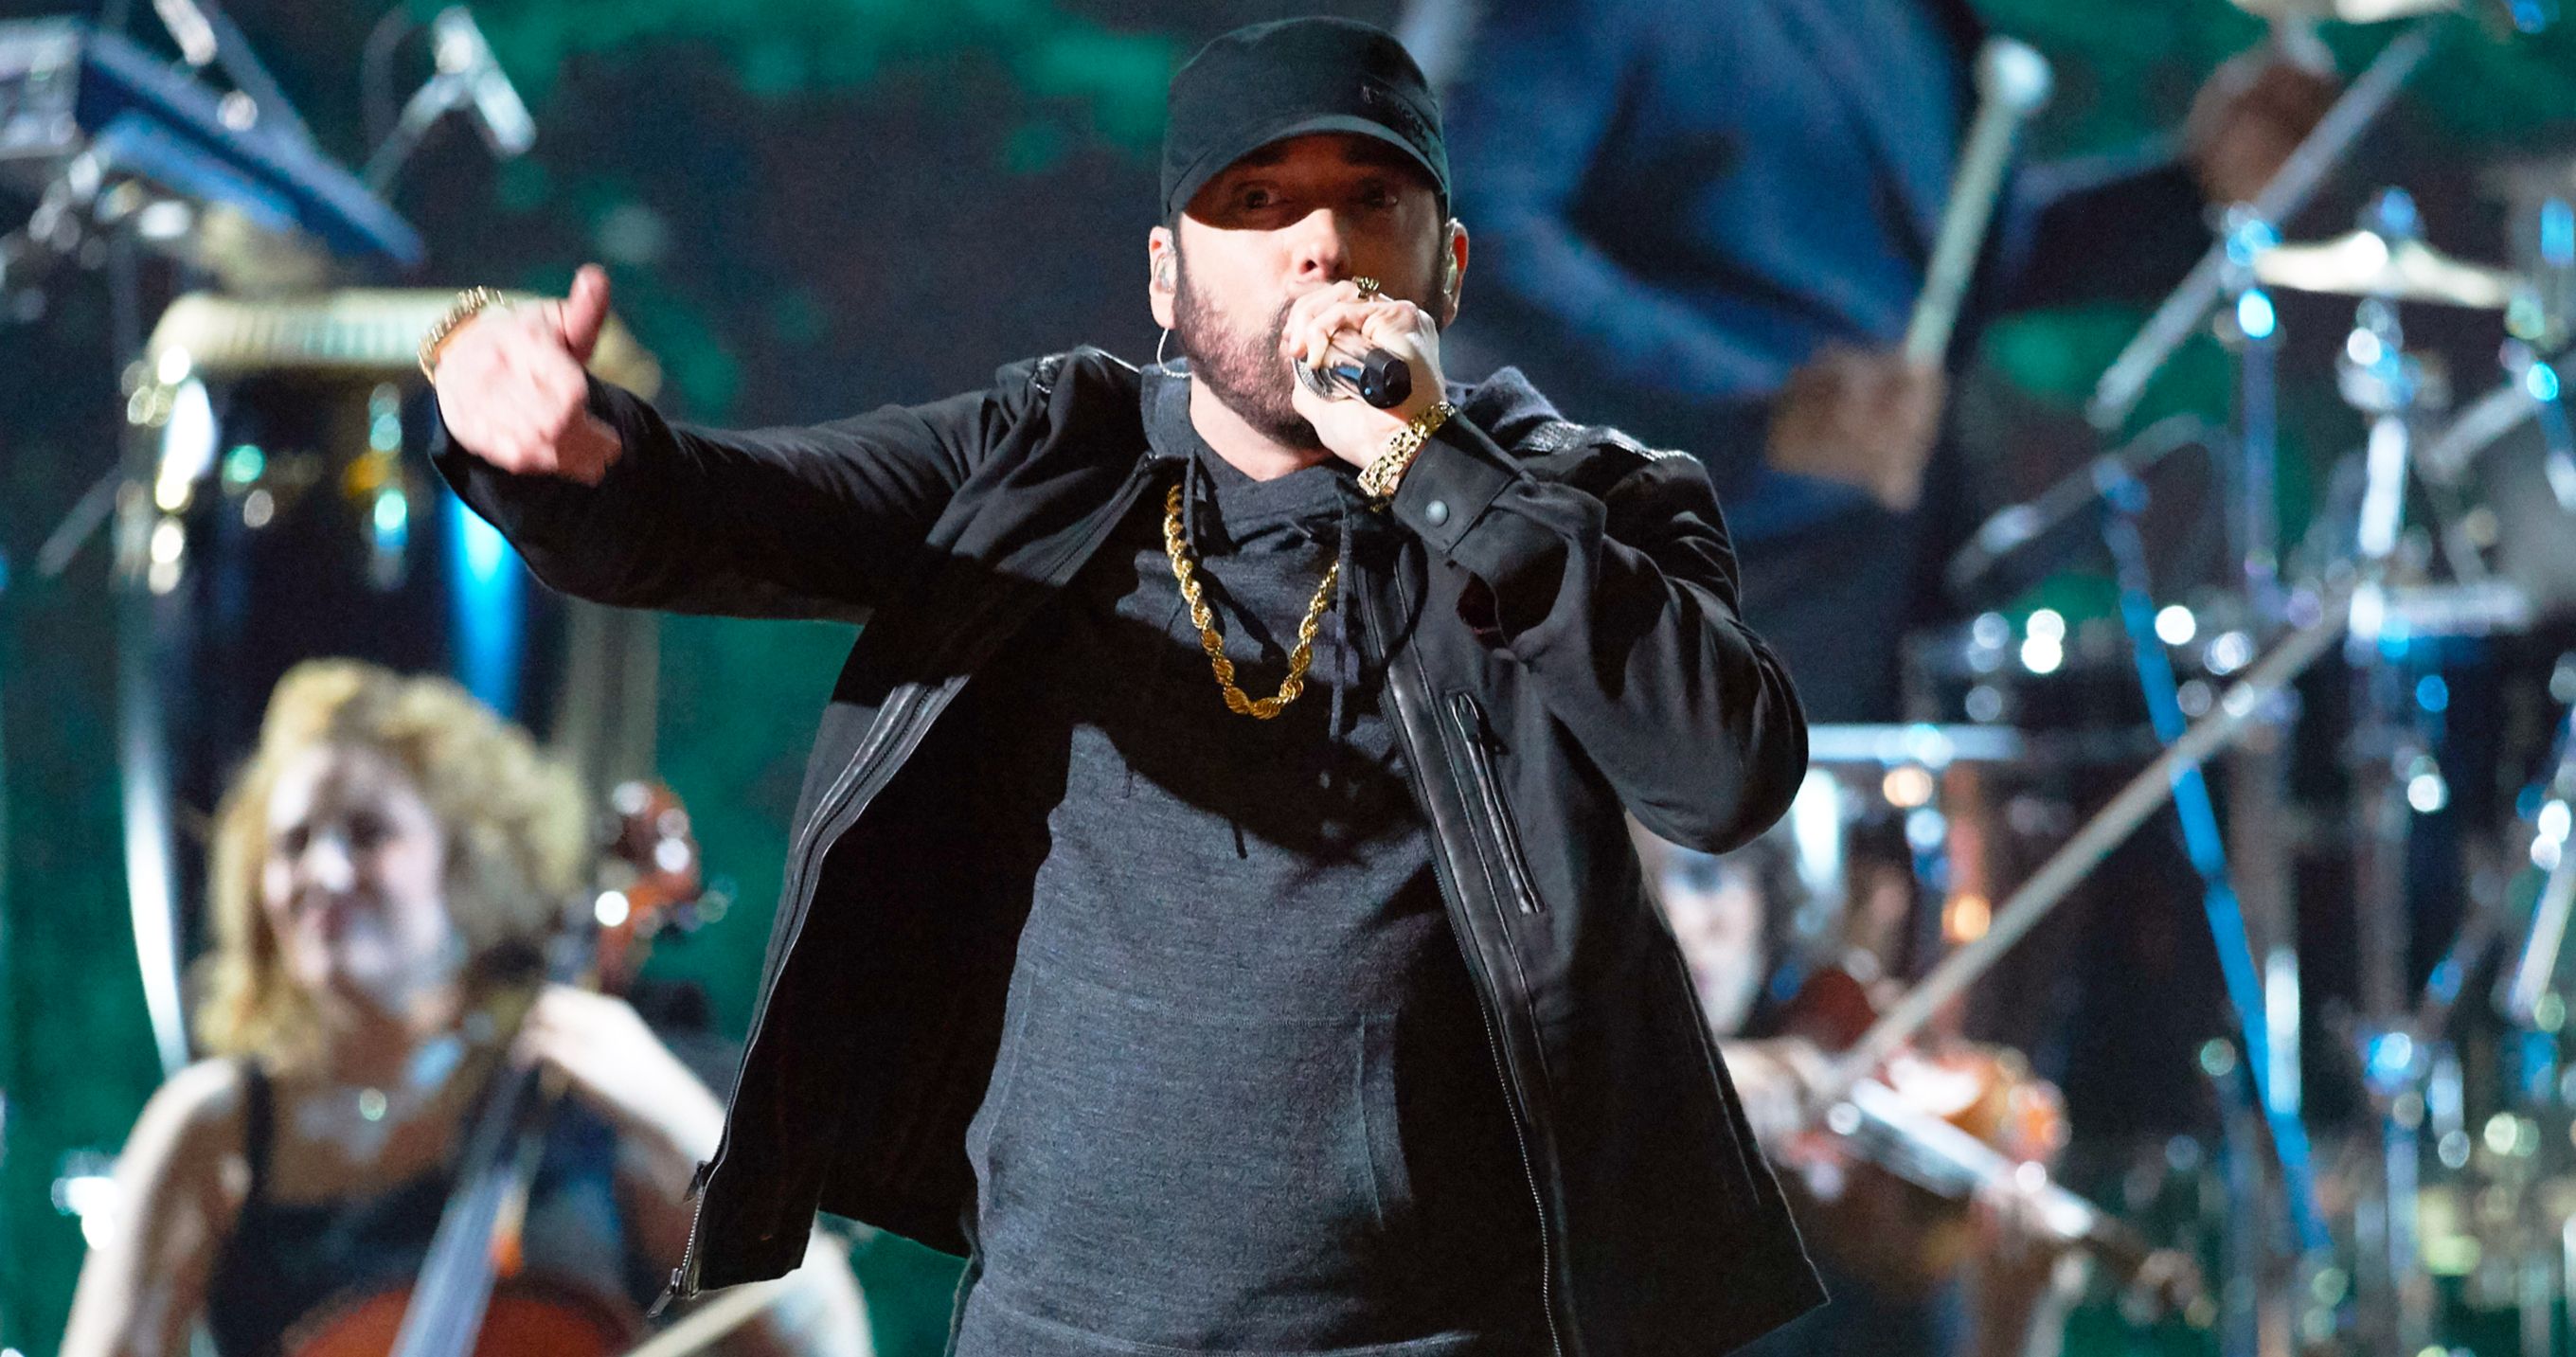 Eminem Crashes Oscars to Play Lose Yourself from 8 Mile